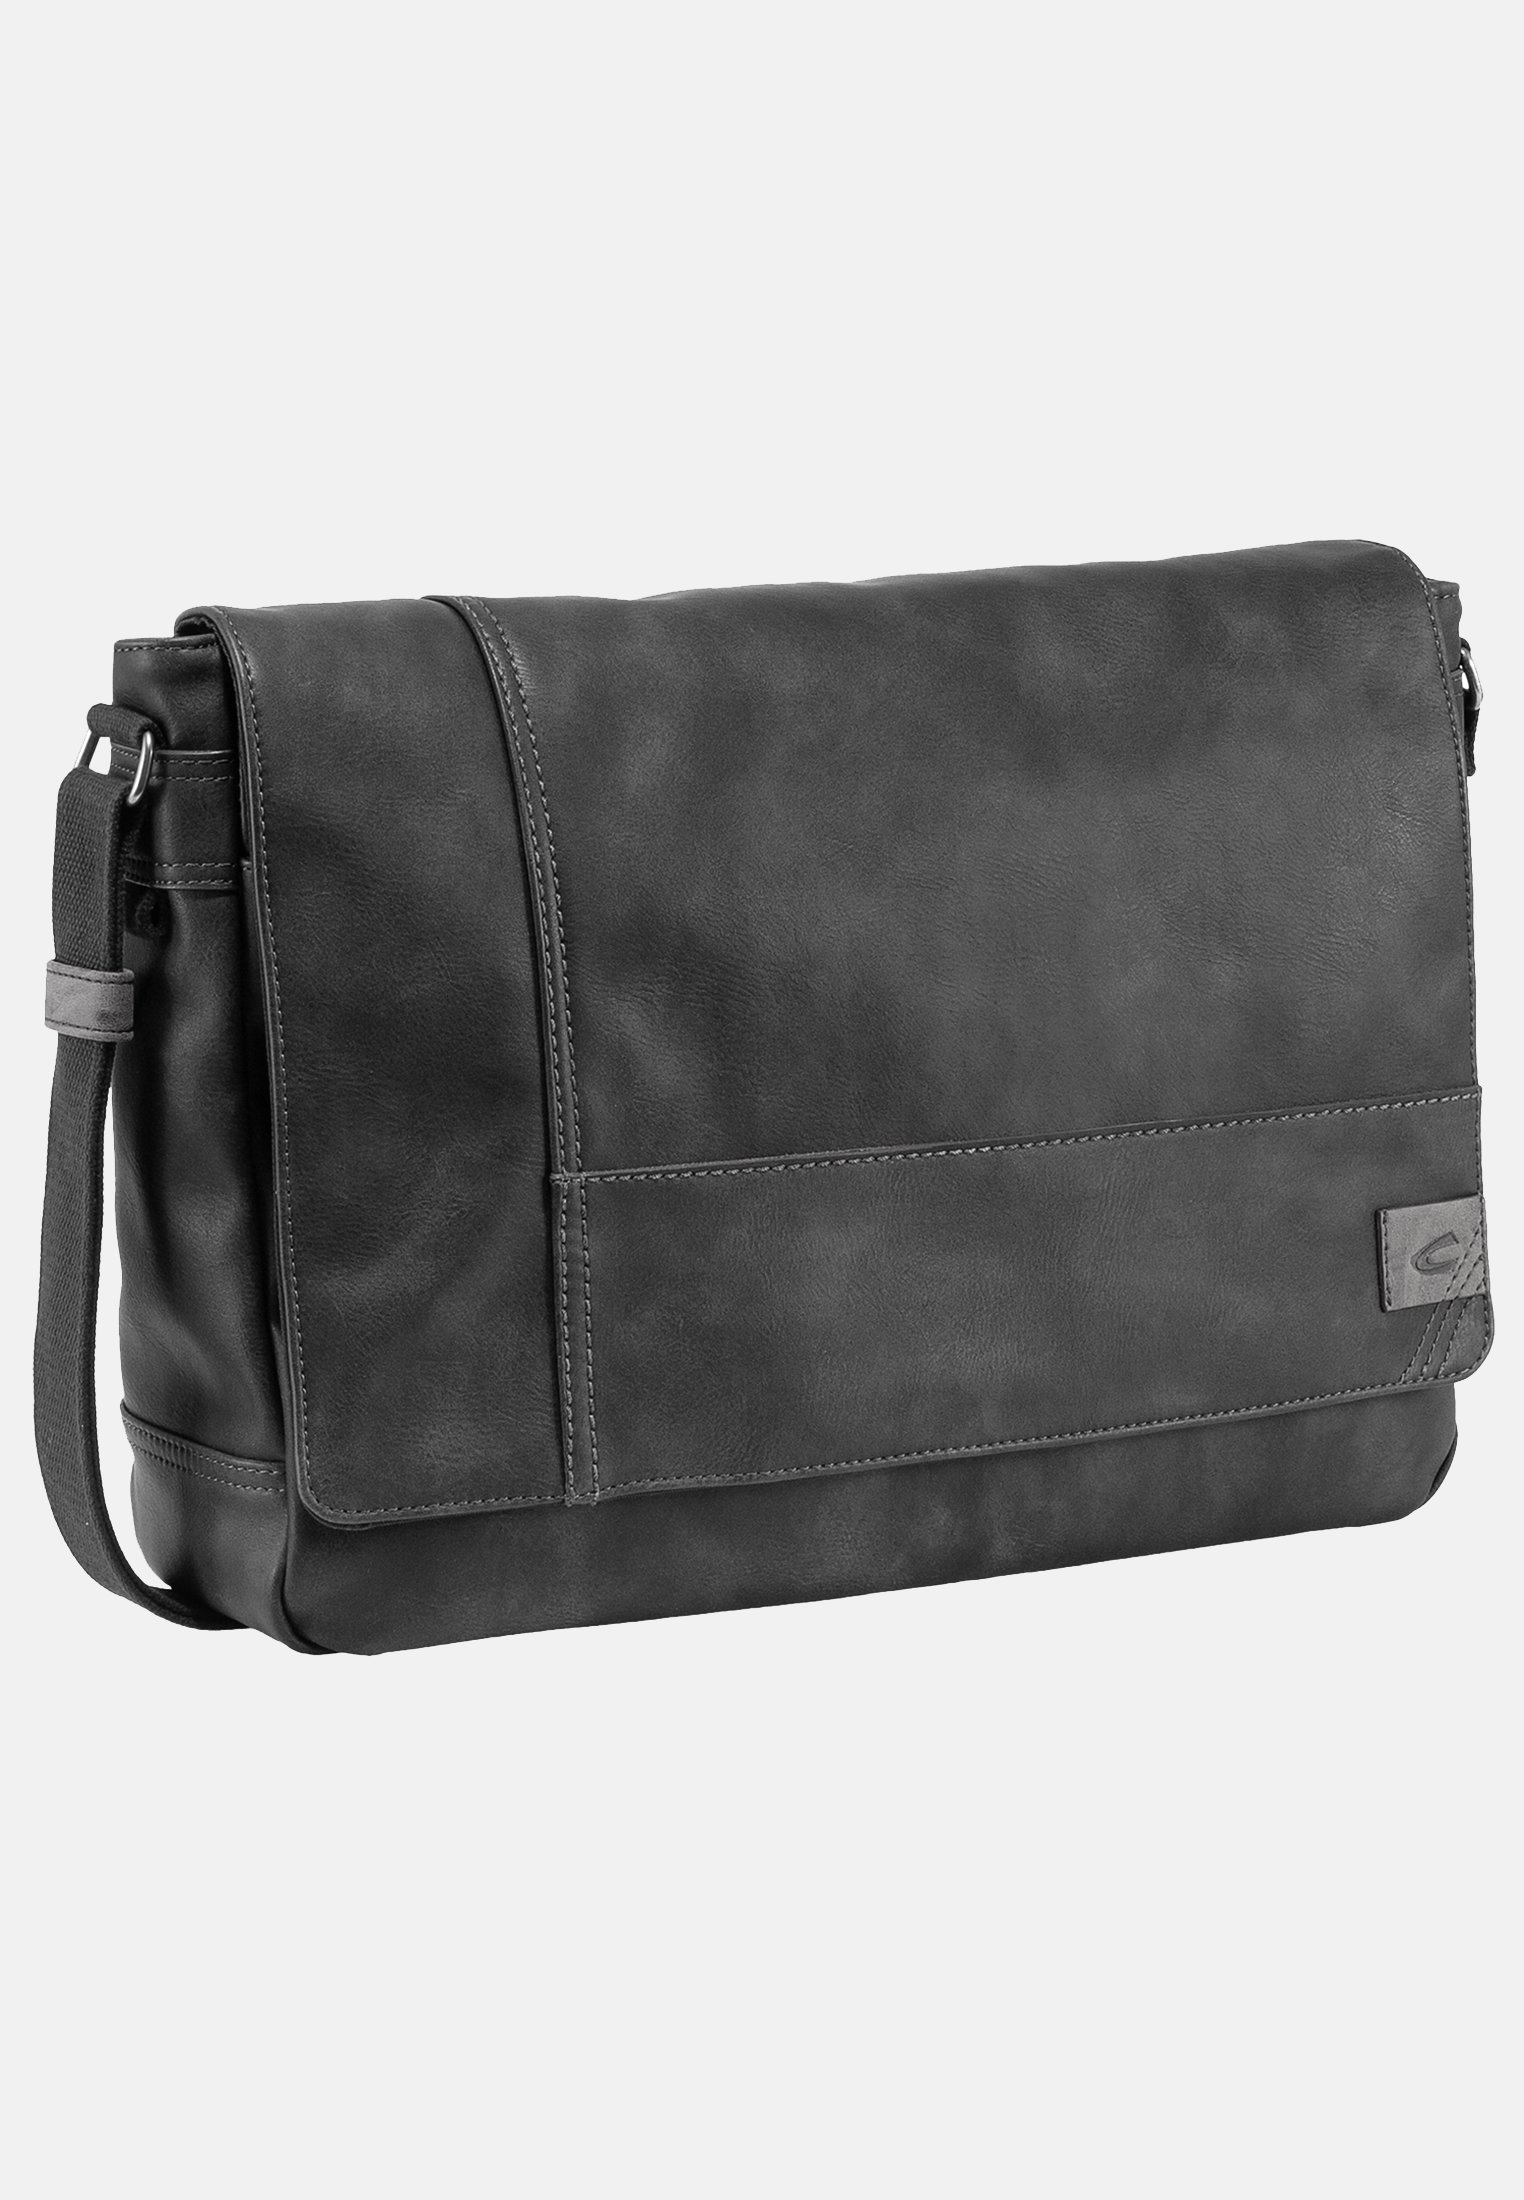 Camel Active Messenger bag with padded laptop compartment